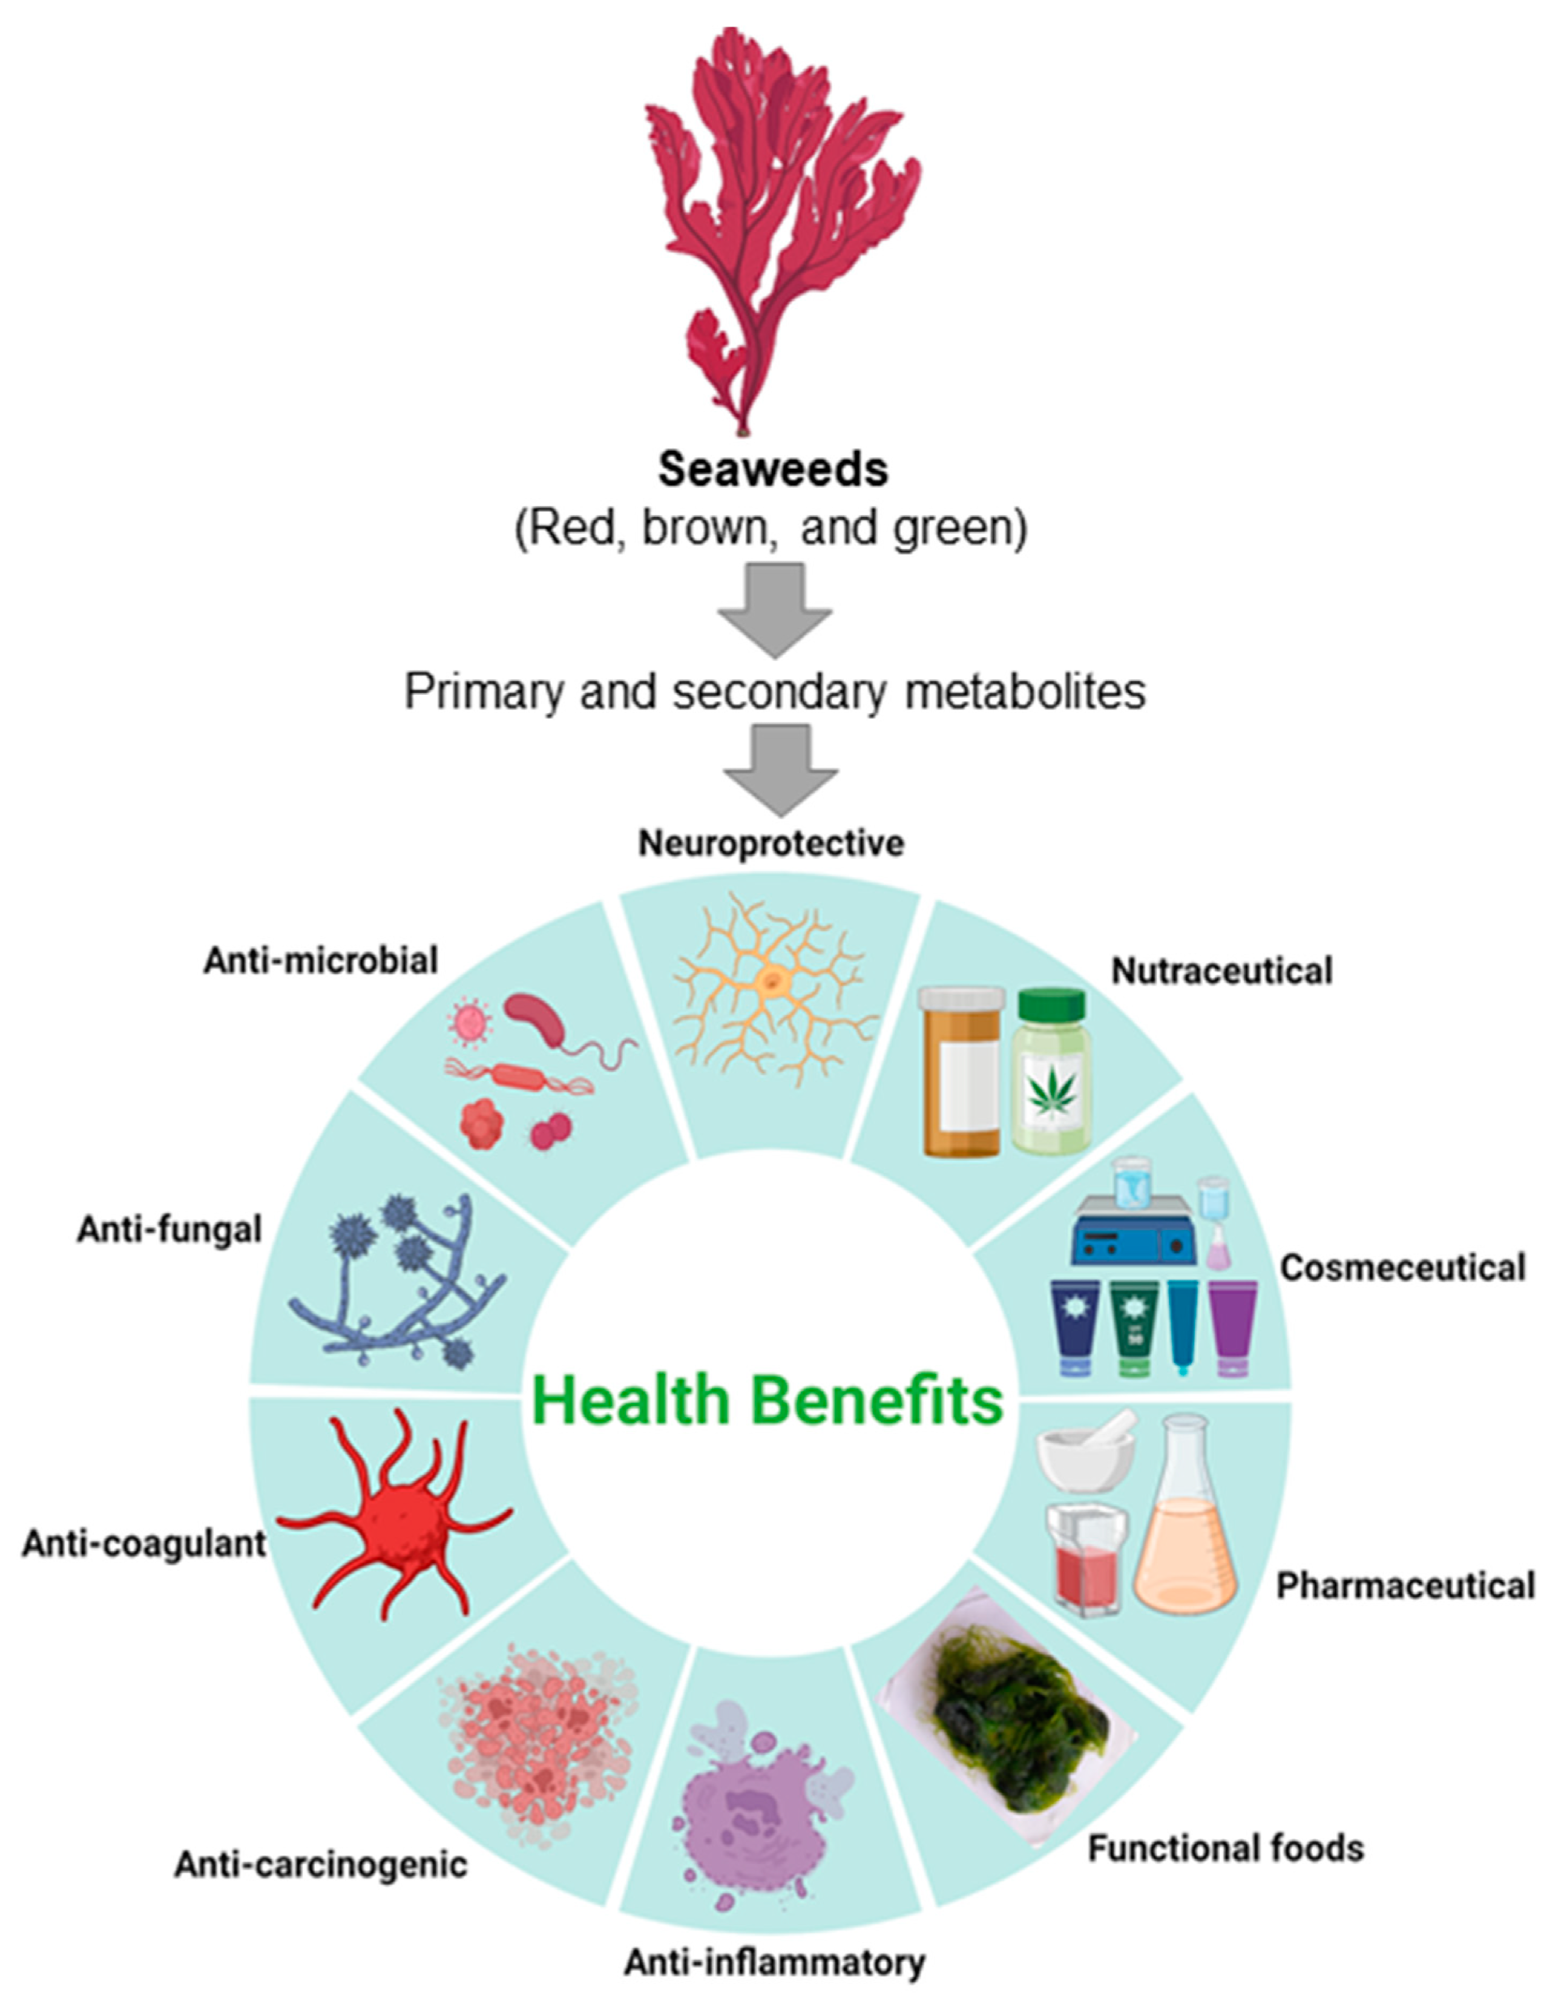 A schematic illustration of seaweed primary and secondary metabolites and their possible application as bioactive compounds and functional foods with the desired benefits.